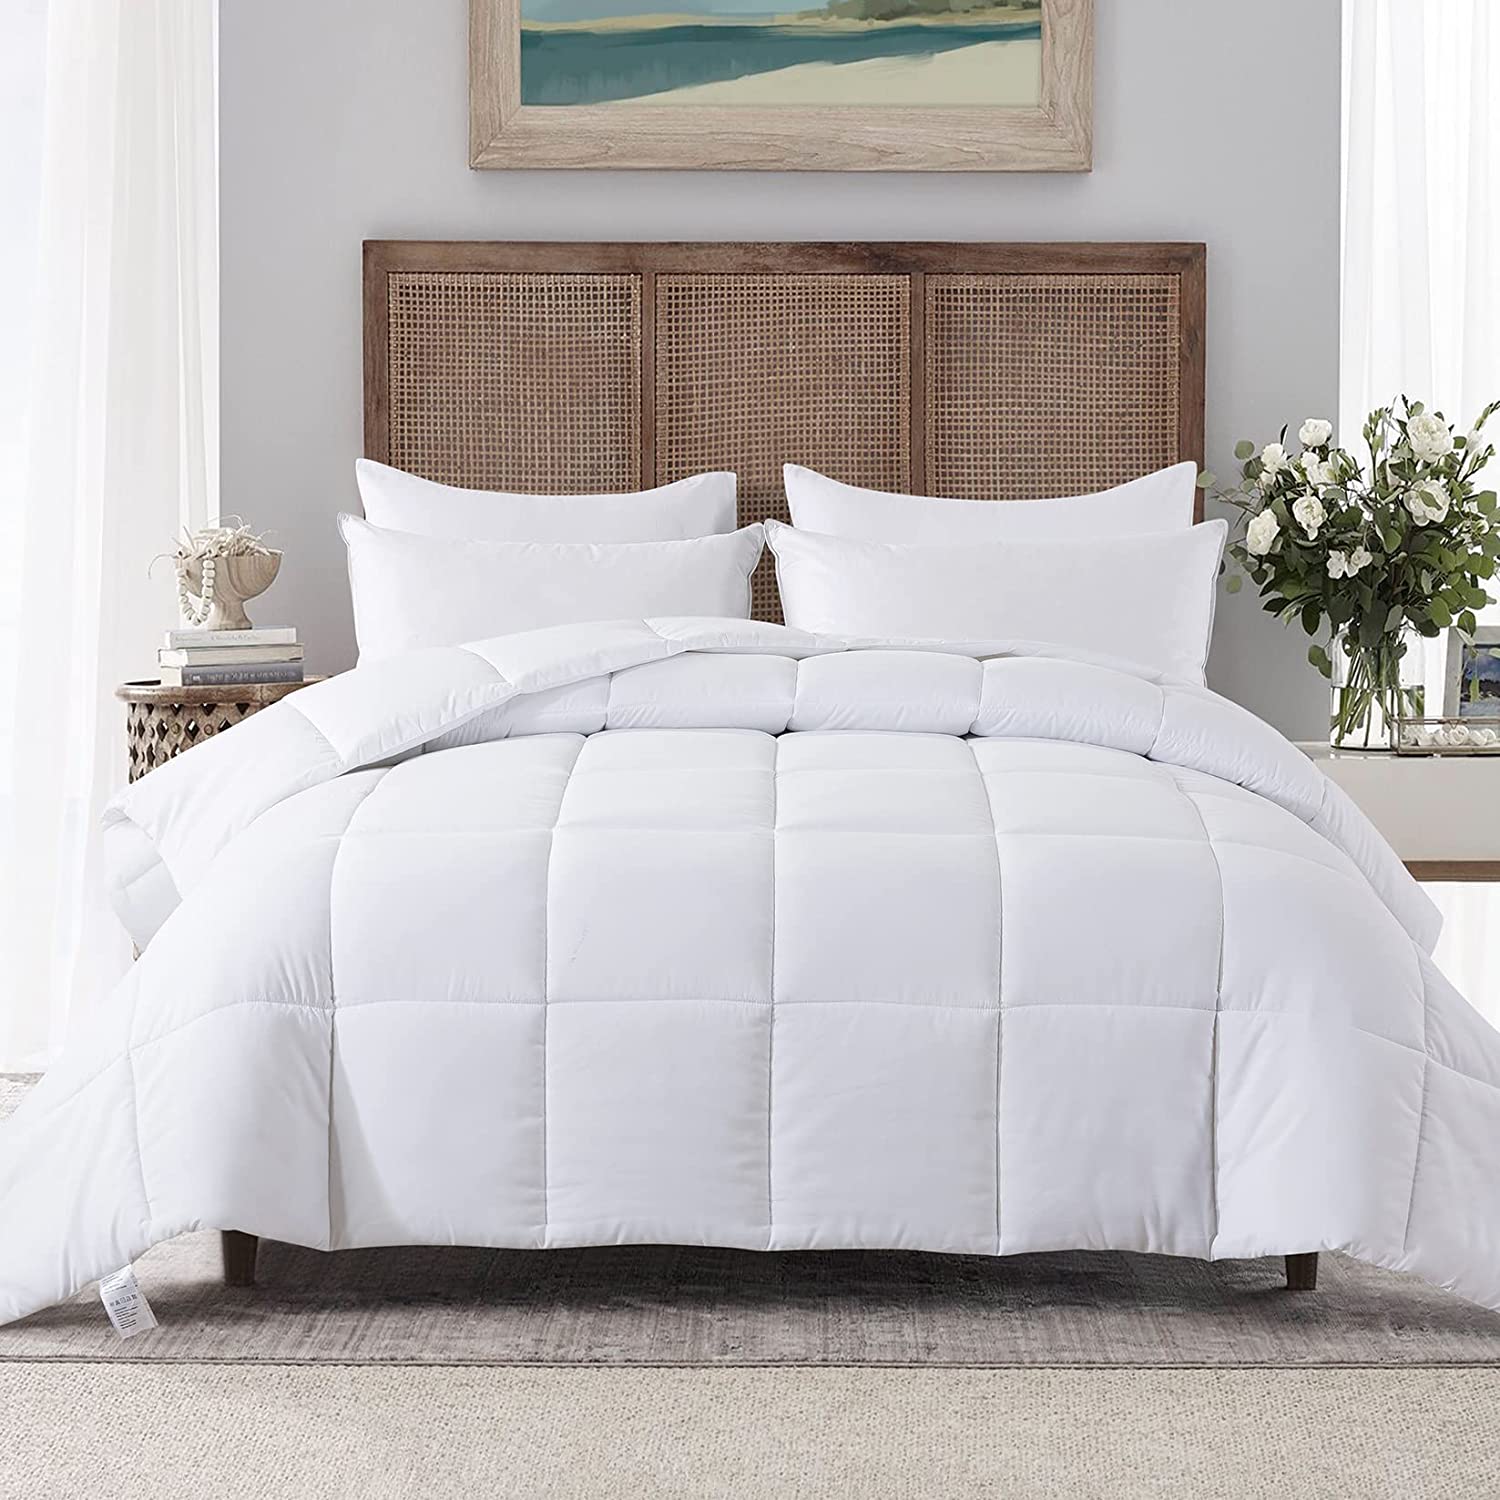 Price:$25.99  Twin Comforter Duvet Insert - All Season White Comforters Twin Size - Quilted Down Alternative Bedding Comforter with Corner Tabs - Winter Summer Fluffy Soft - Machine Washable : Home & Kitchen